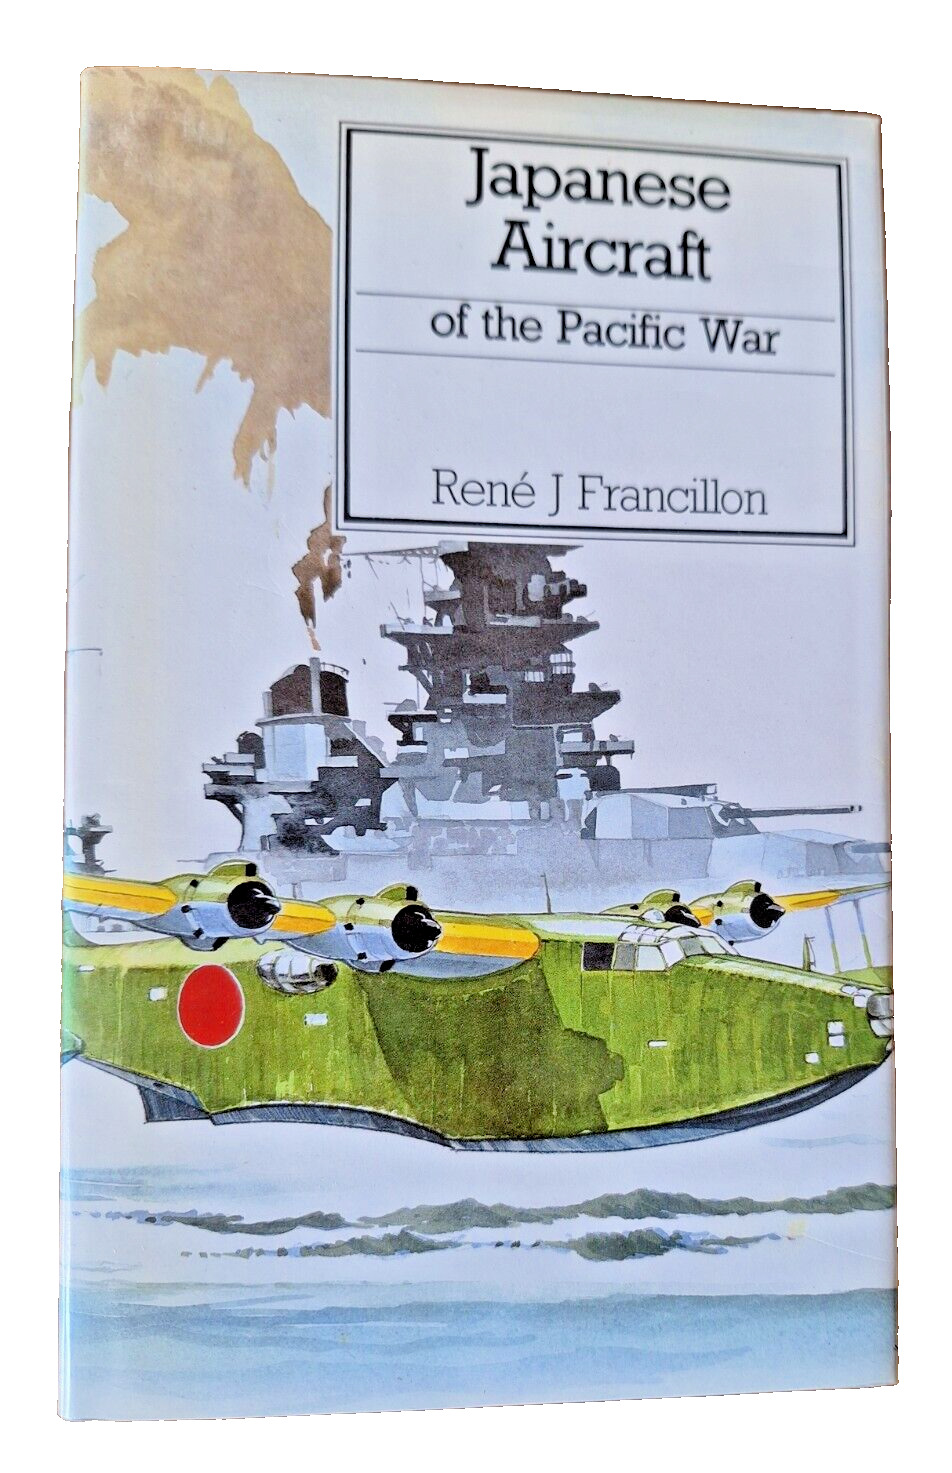 Japanese aircraft of the Pacific War by Rene J. Francillon. Putnam 1987.